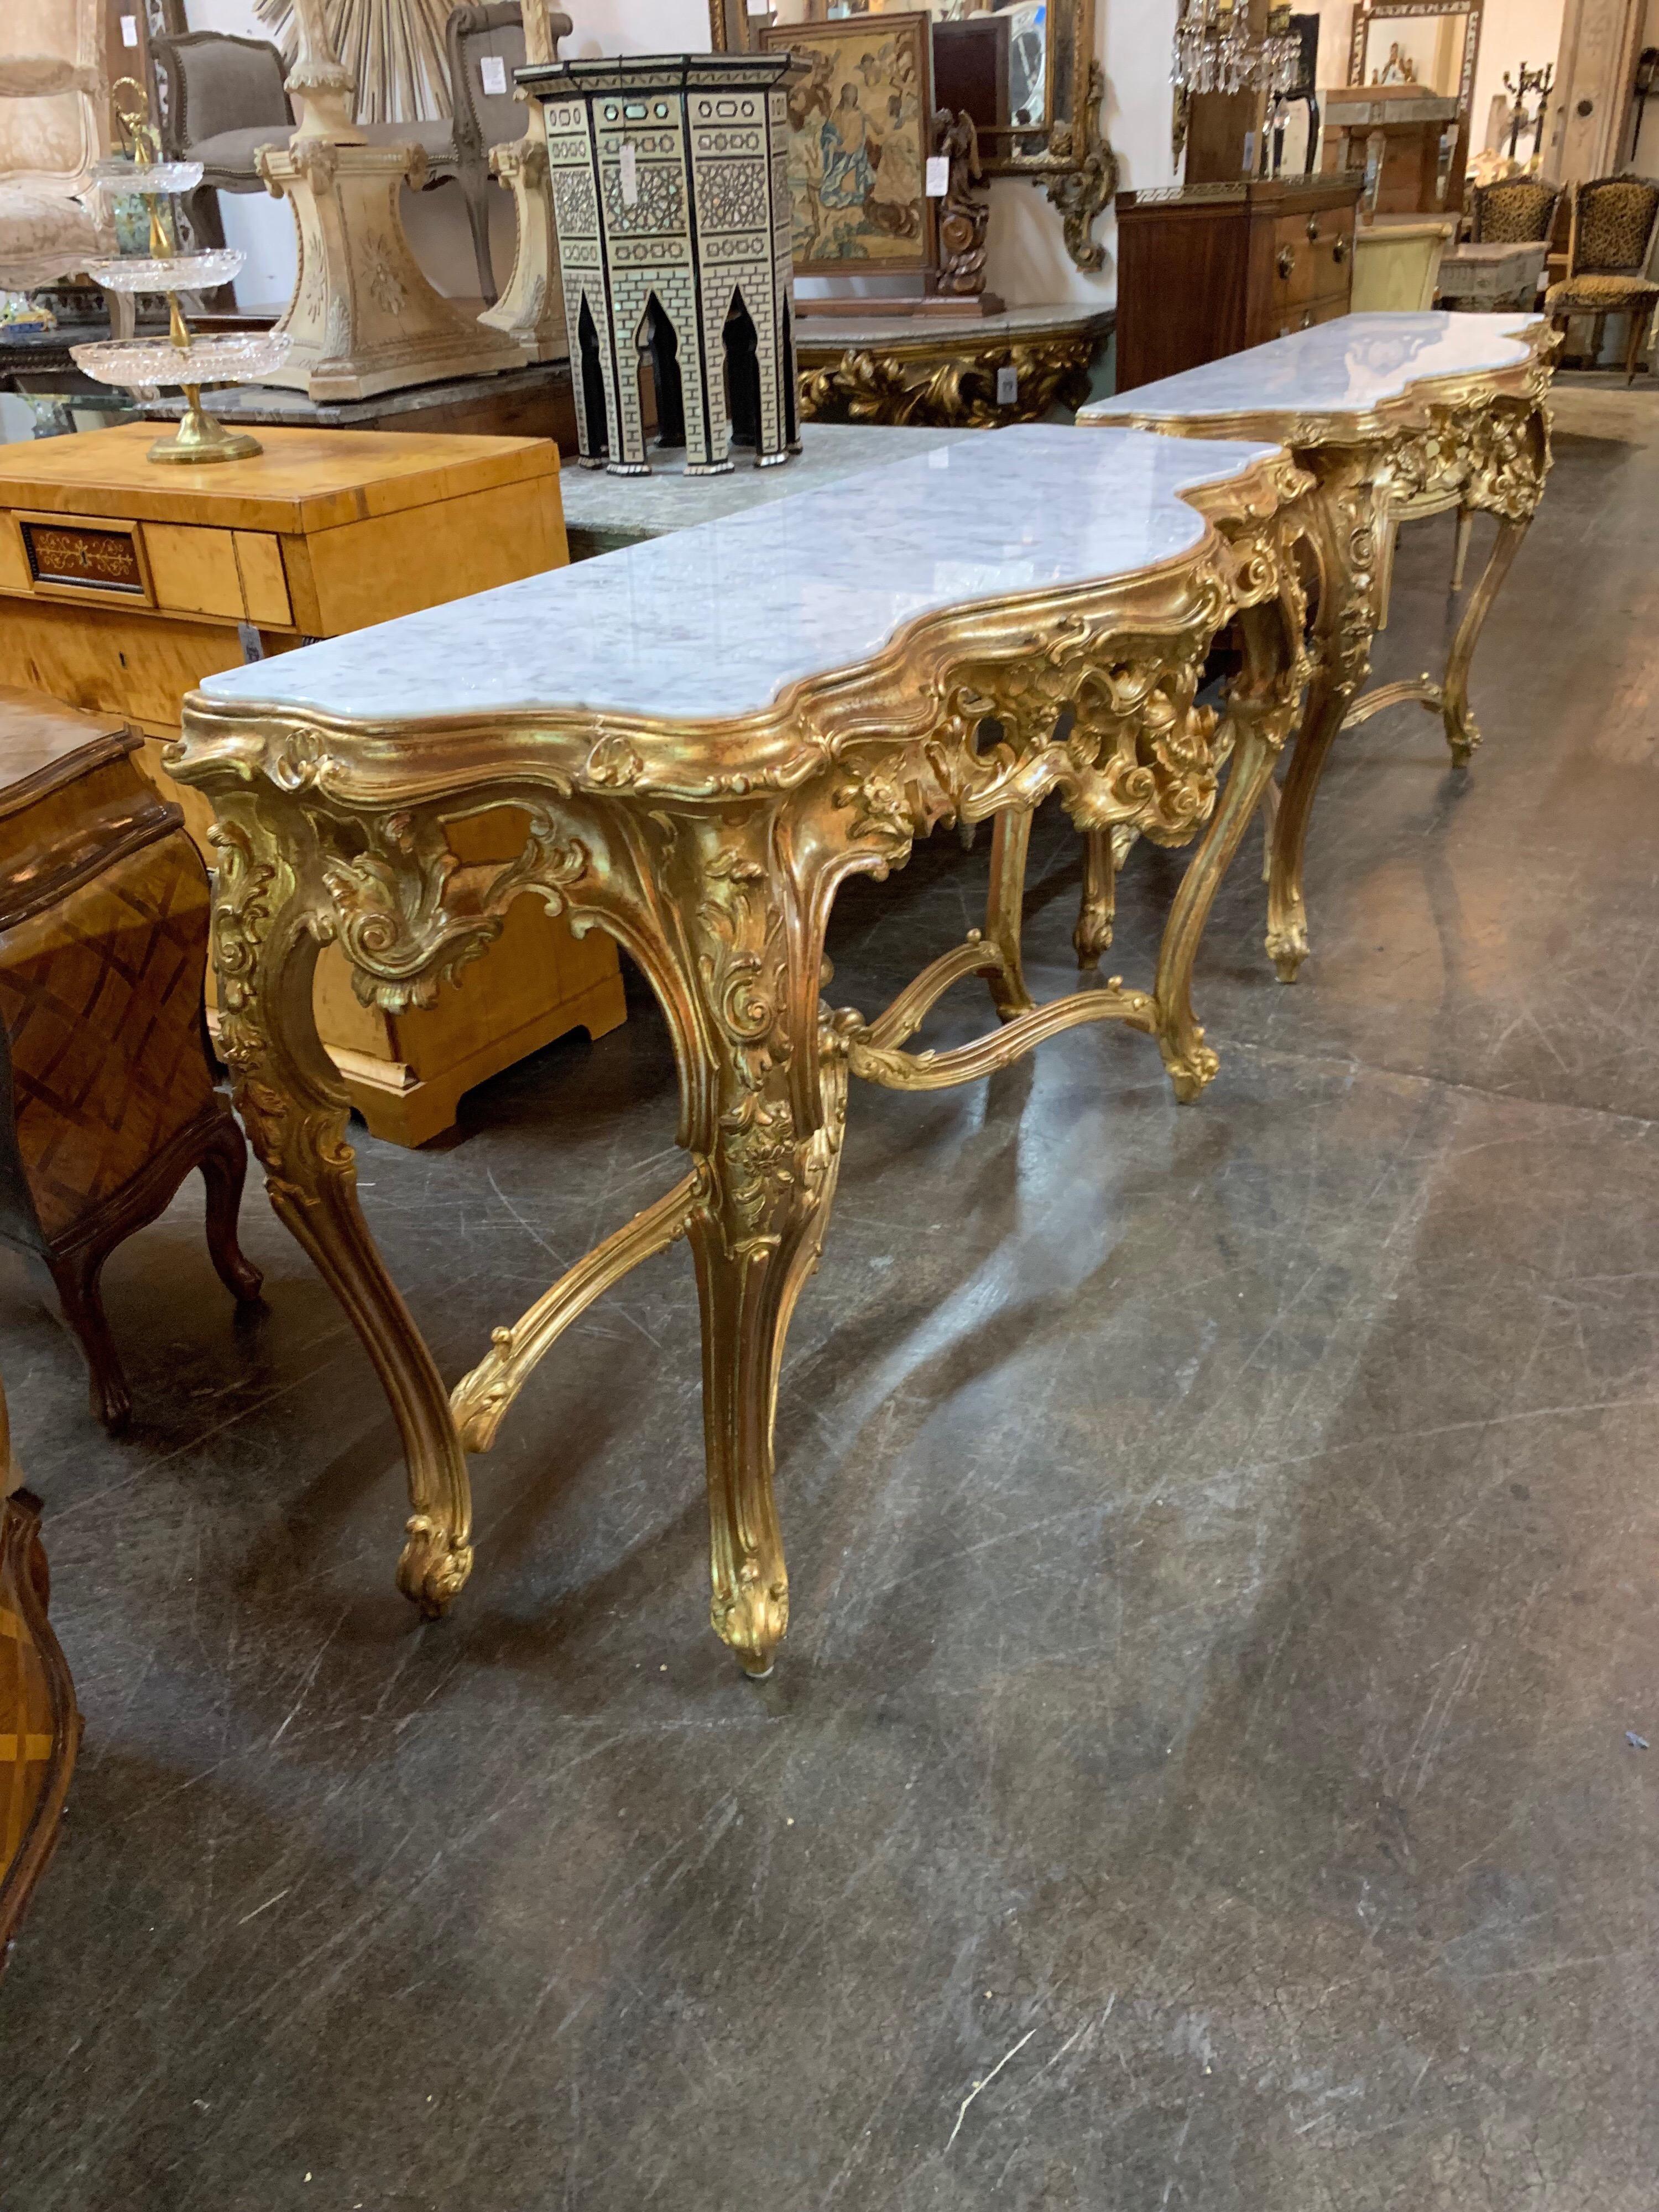 Beautiful pair of Italian Louis XV style carved giltwood consoles with Carrara marble tops.
Exceptional carving and gilding on these pieces. Very special pair for an elegant home.